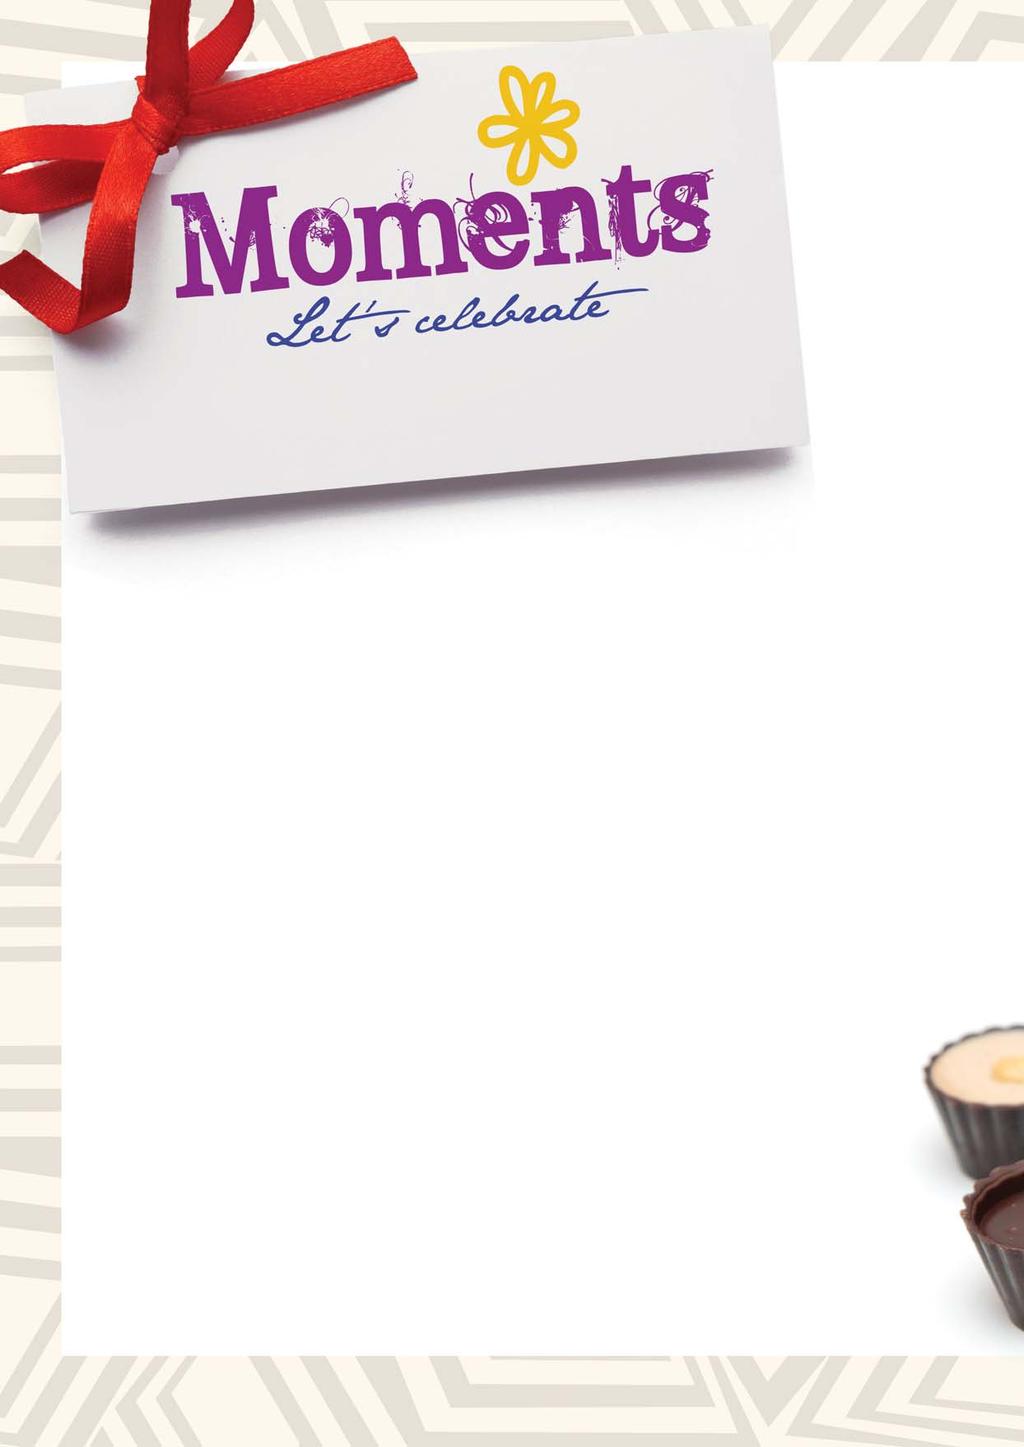 Moments Group helps people celebrate. The British love giving cards, chocolates and other gifts on special occasions. Moments Group meets that demand throughout the UK.